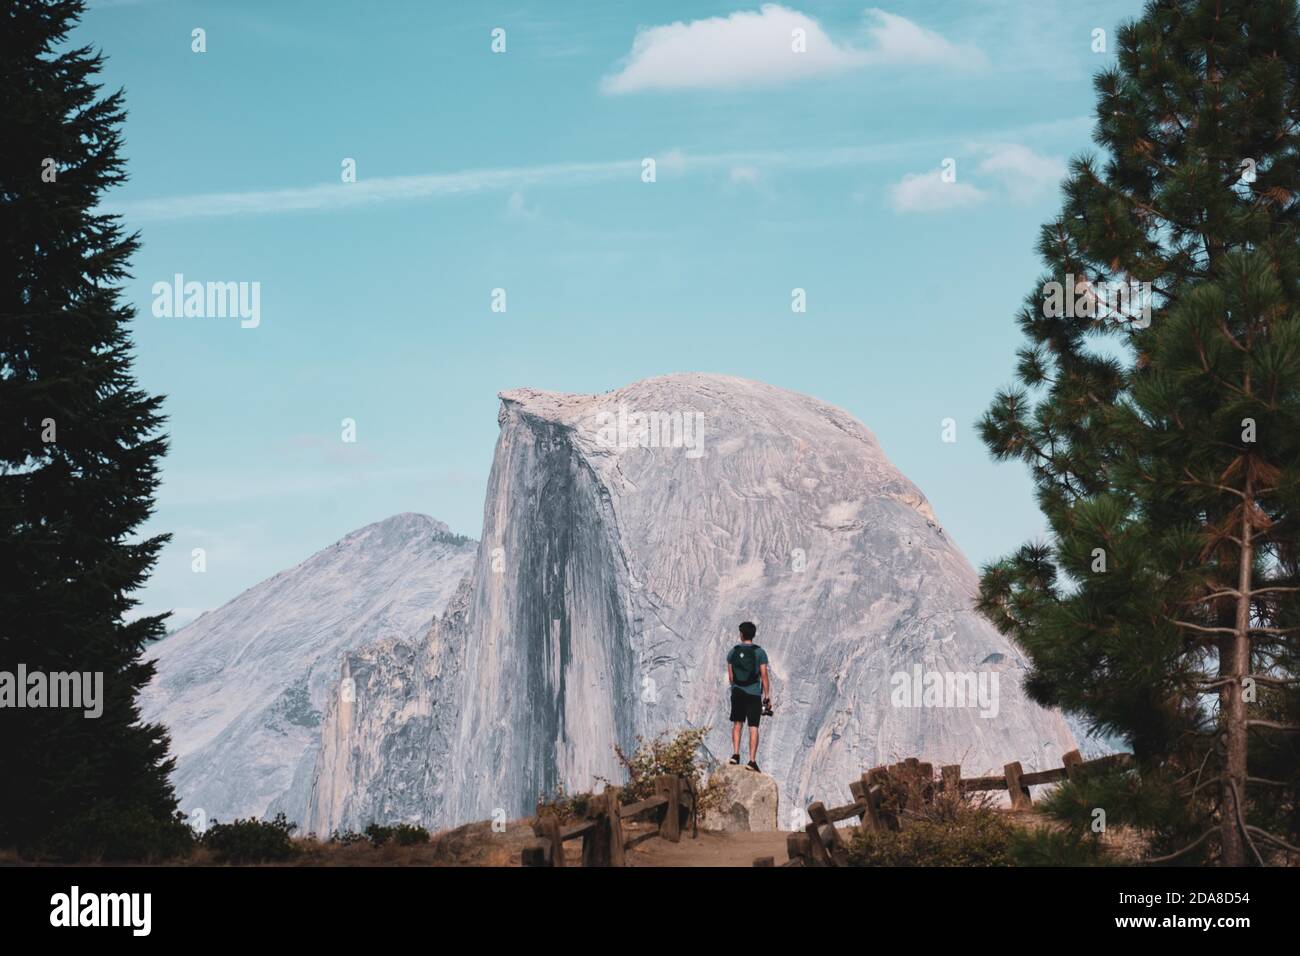 I shot this of my brother gazing at the majestic Half Dome, in Yosemite National Park. We love visiting national parks, all across America. Stock Photo